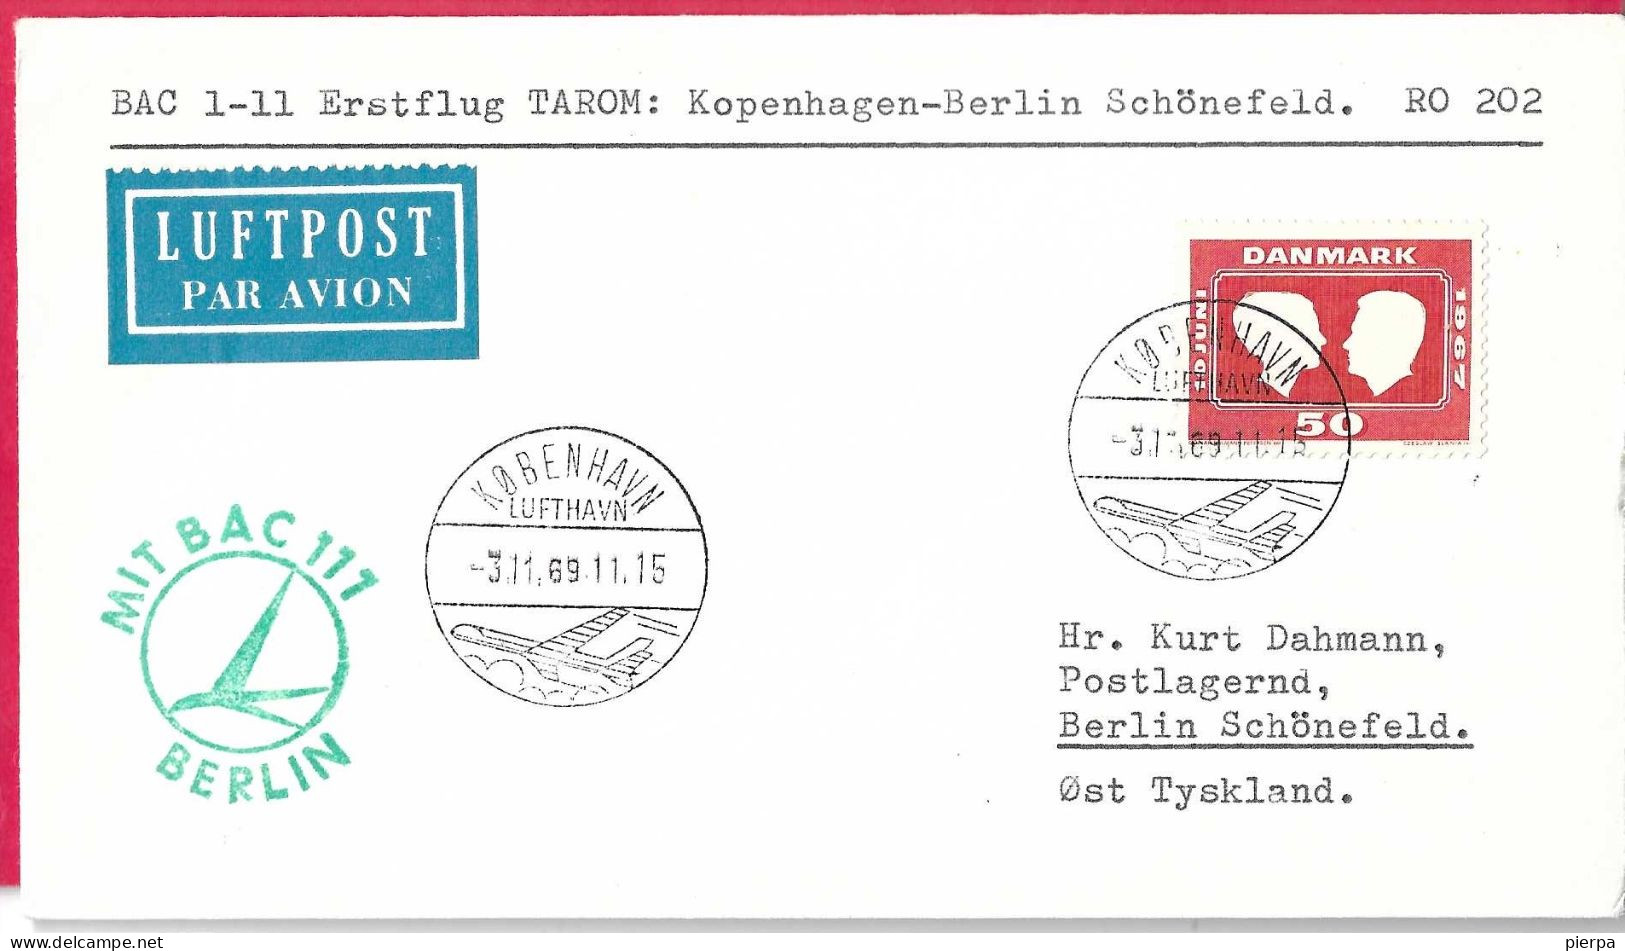 DANMARK - FIRST FLIGHT TAROM WITH BAC 117 FROM KOBENHAVN TO BERLIN/SCHONEFELD *3.11.69* ON OFFICIAL COVER - Posta Aerea